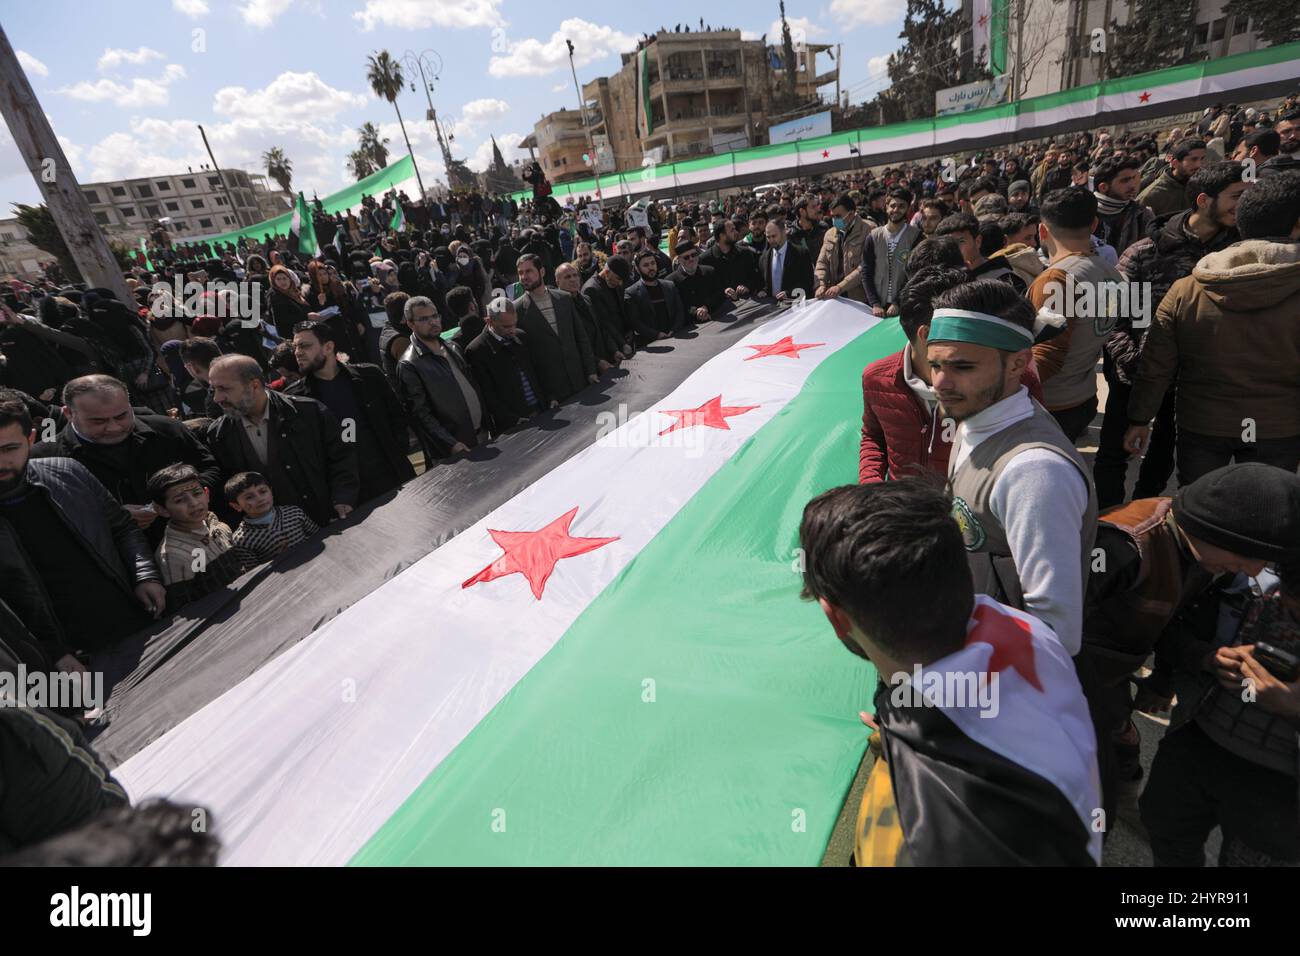 People hold an opposition flag during a protest marking the 11th anniversary of the start of the Syrian conflict, in the opposition-held Idlib, Syria March 15, 2022. REUTERS/Khalil Ashawi Stock Photo